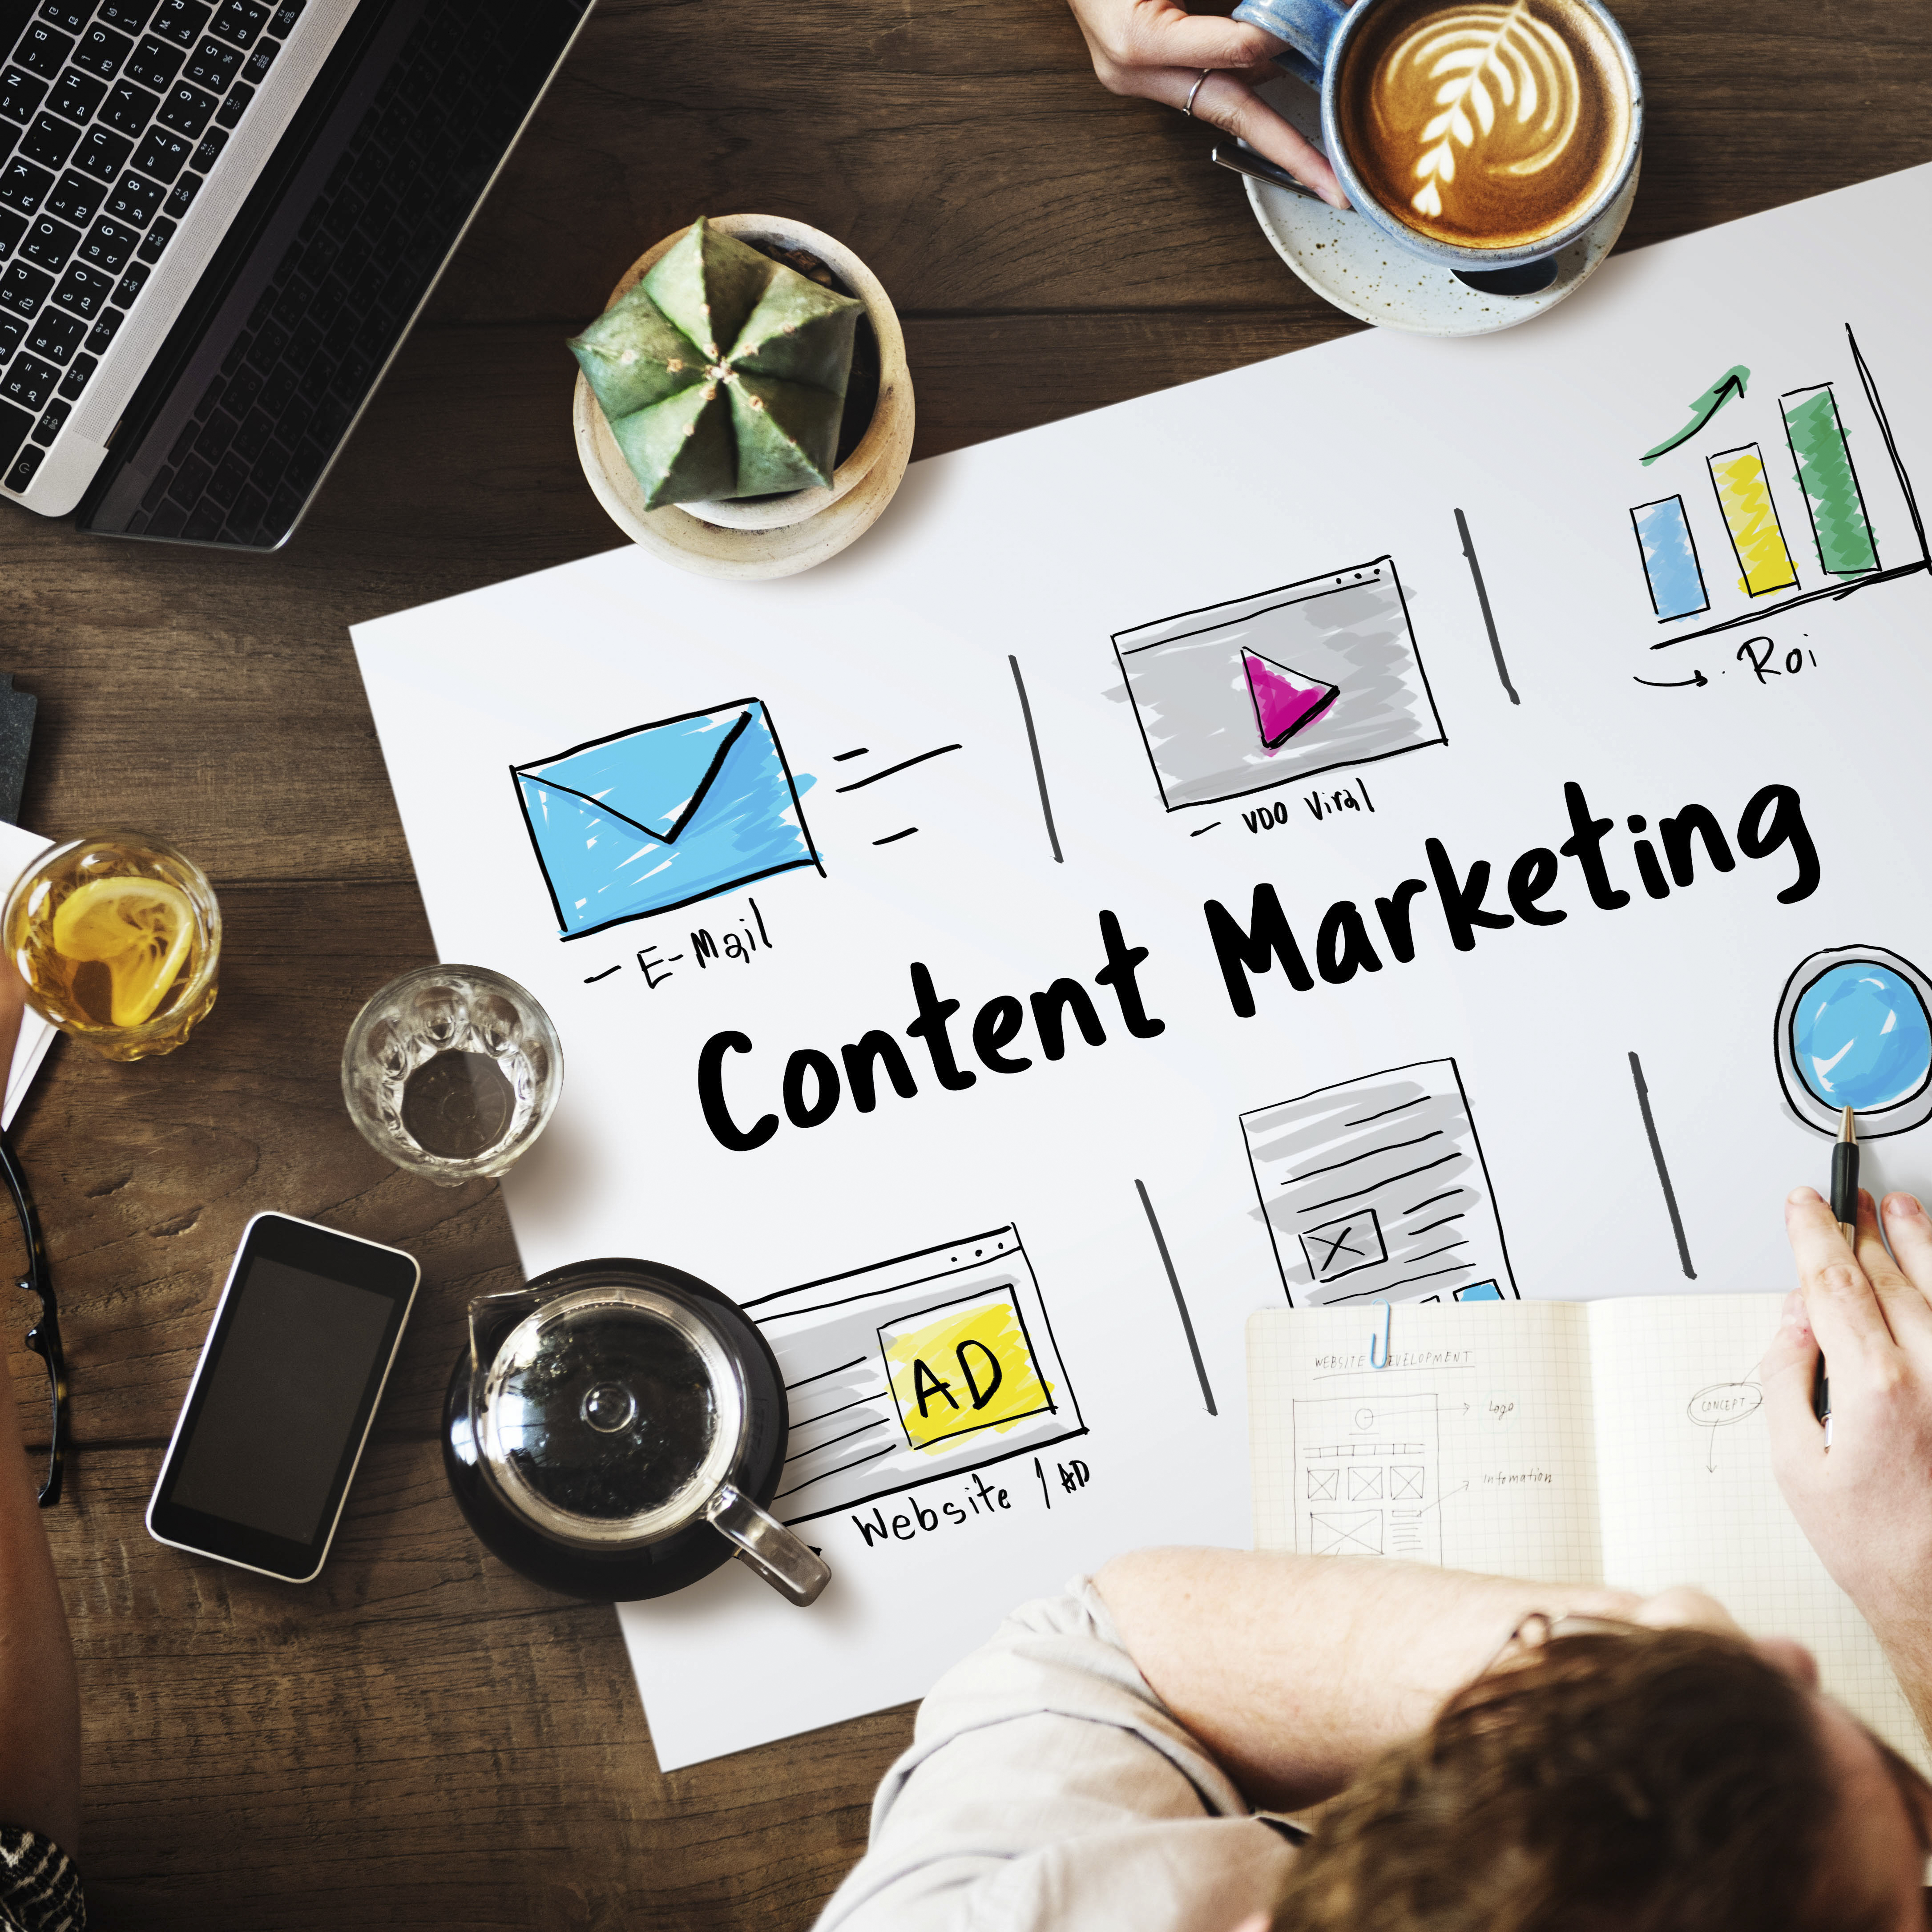 Read our expert insights into the subject of content marketing for law firms. Find out how law firms establish legal expertise online through effective content strategies.